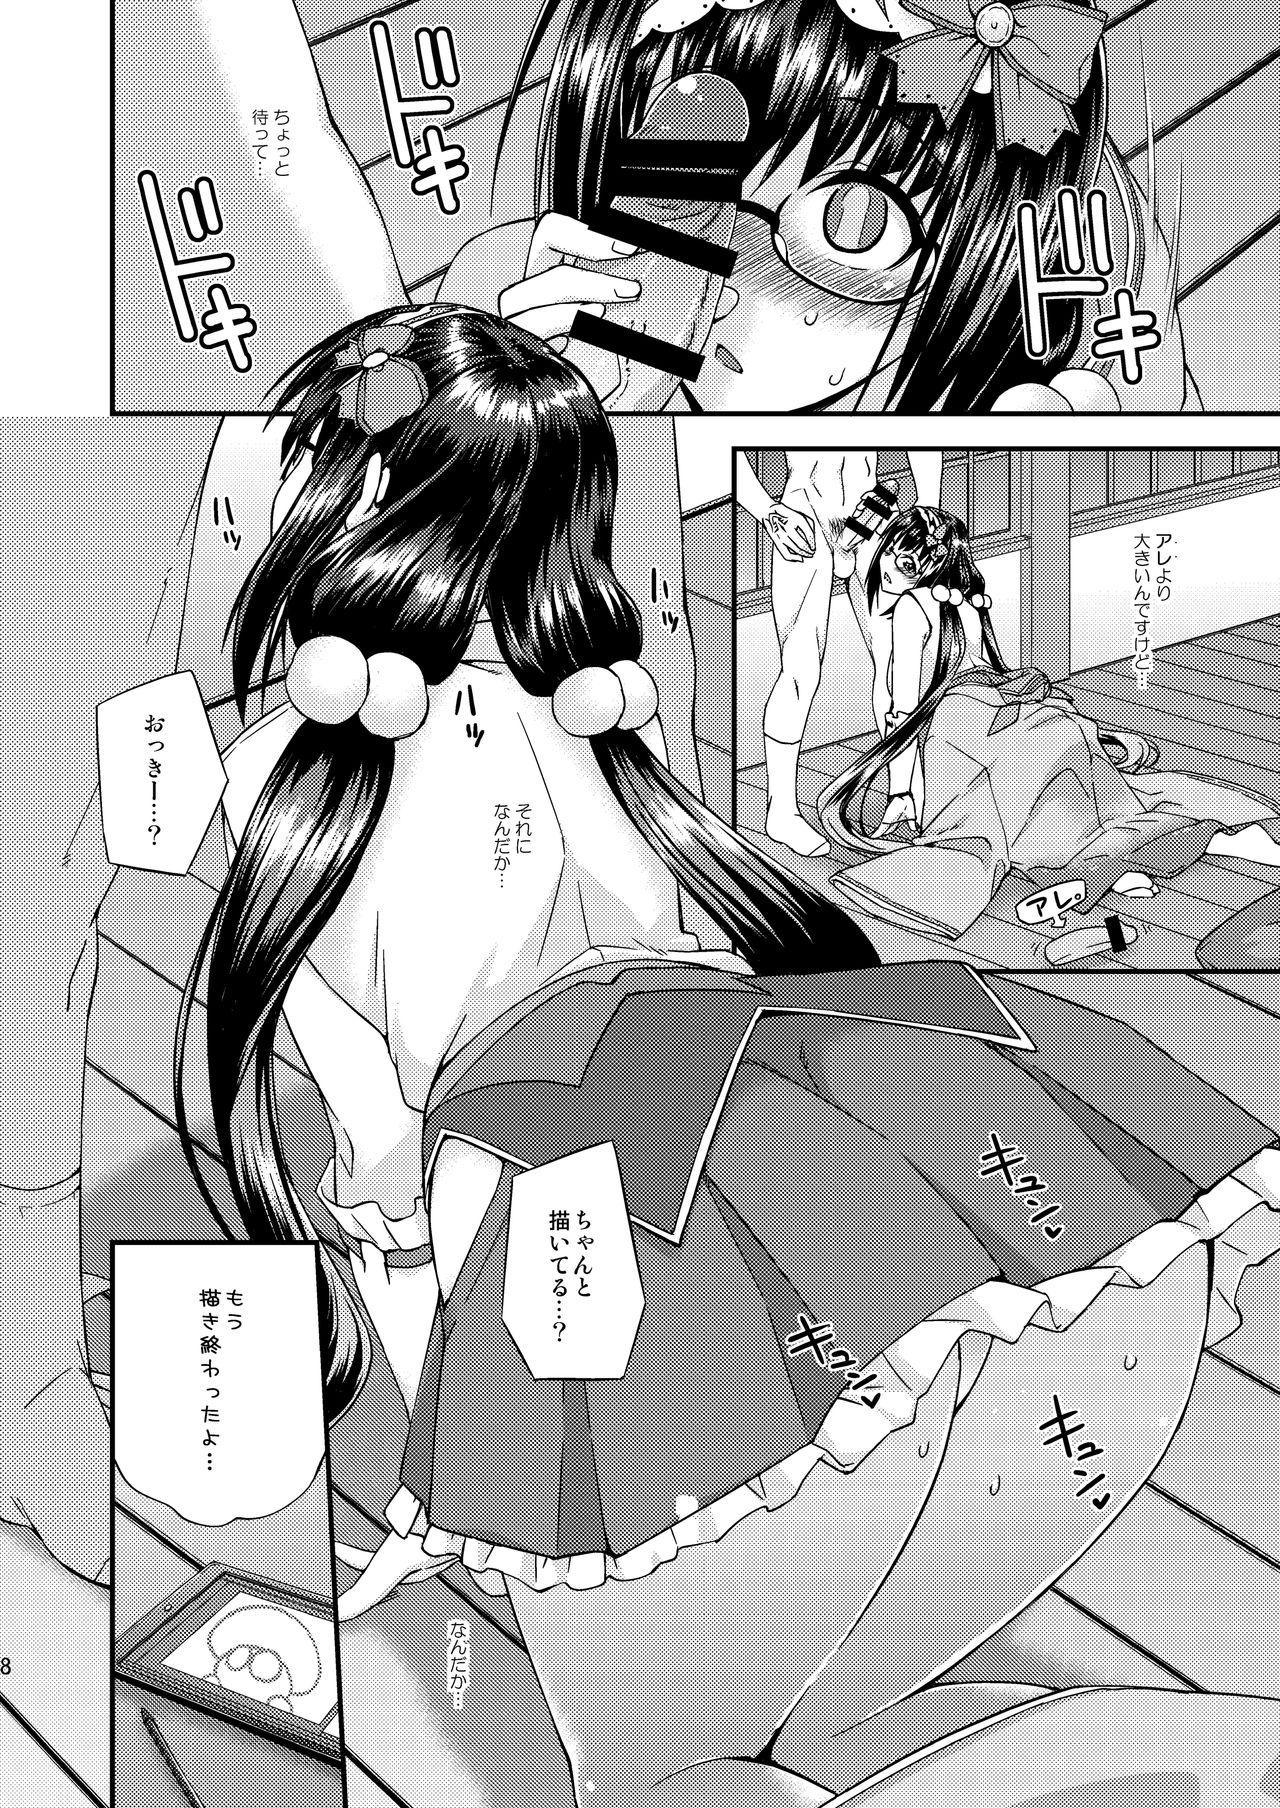 Audition Osakabehime no Iutoori - Fate grand order Sloppy Blow Job - Page 7